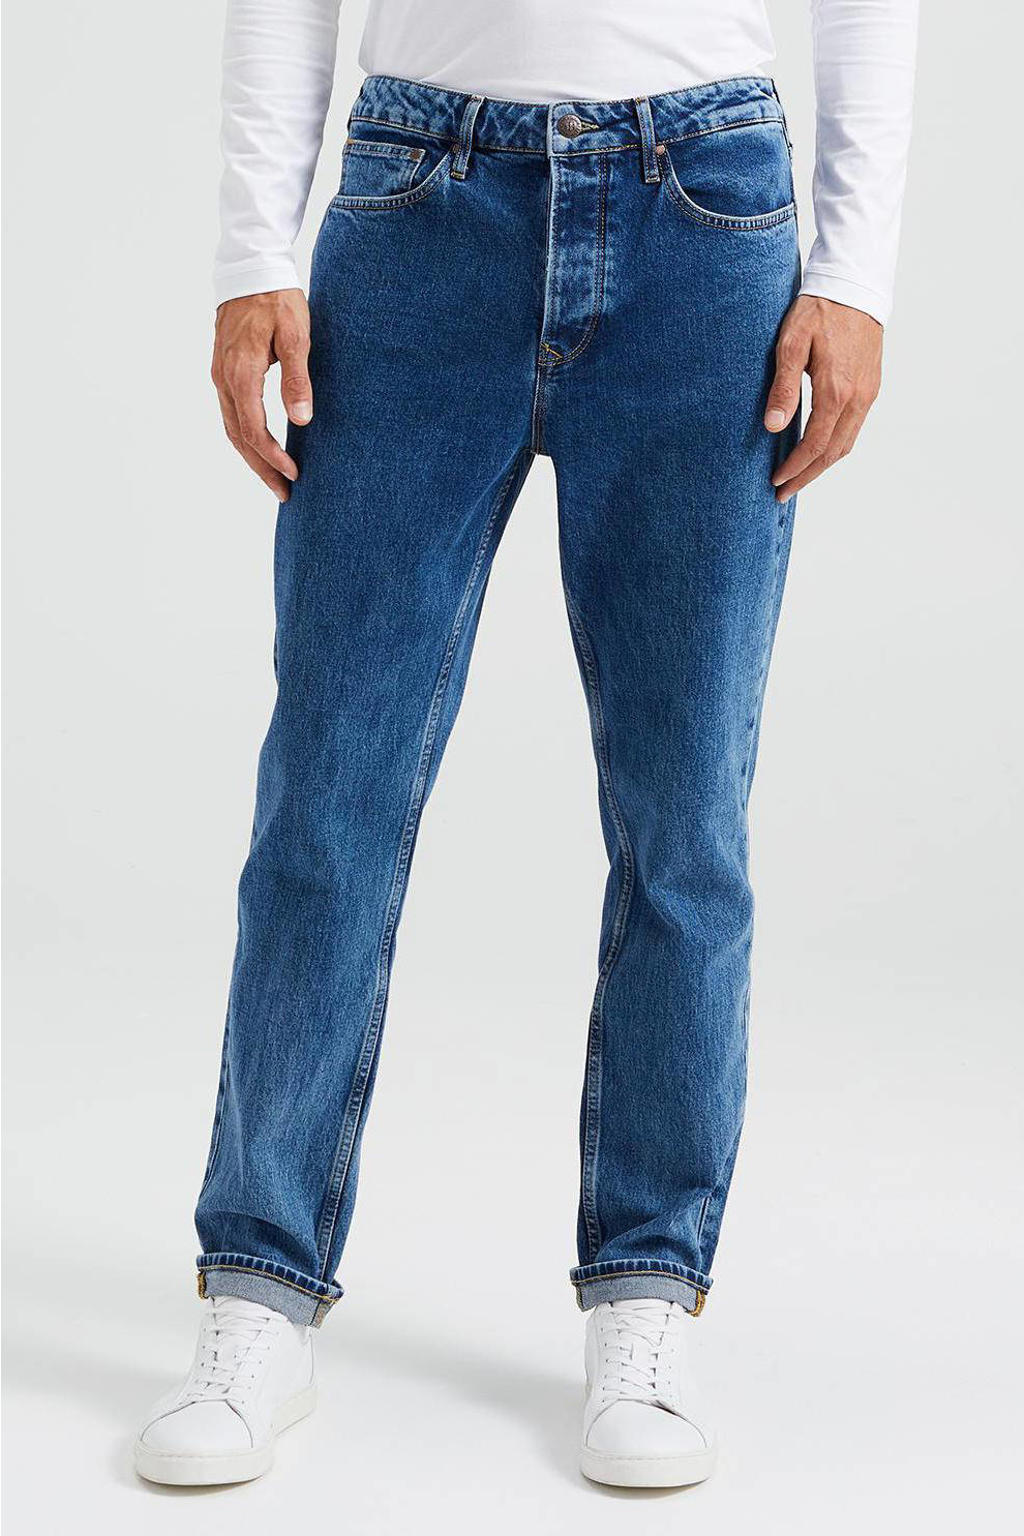 WE Fashion tapered fit jeans stone denim